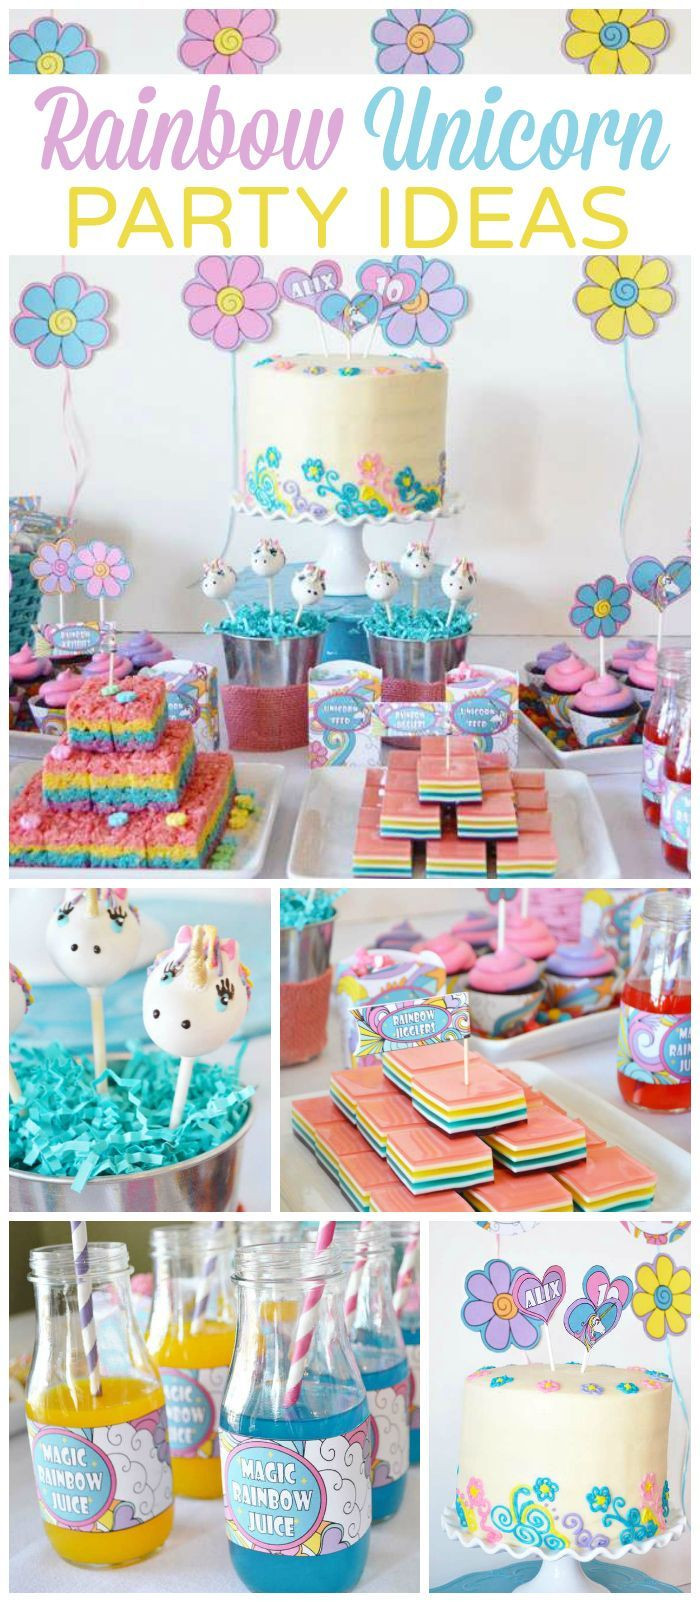 Unicorn Rainbow Party Ideas
 This rainbow and unicorn party is so girly and magical